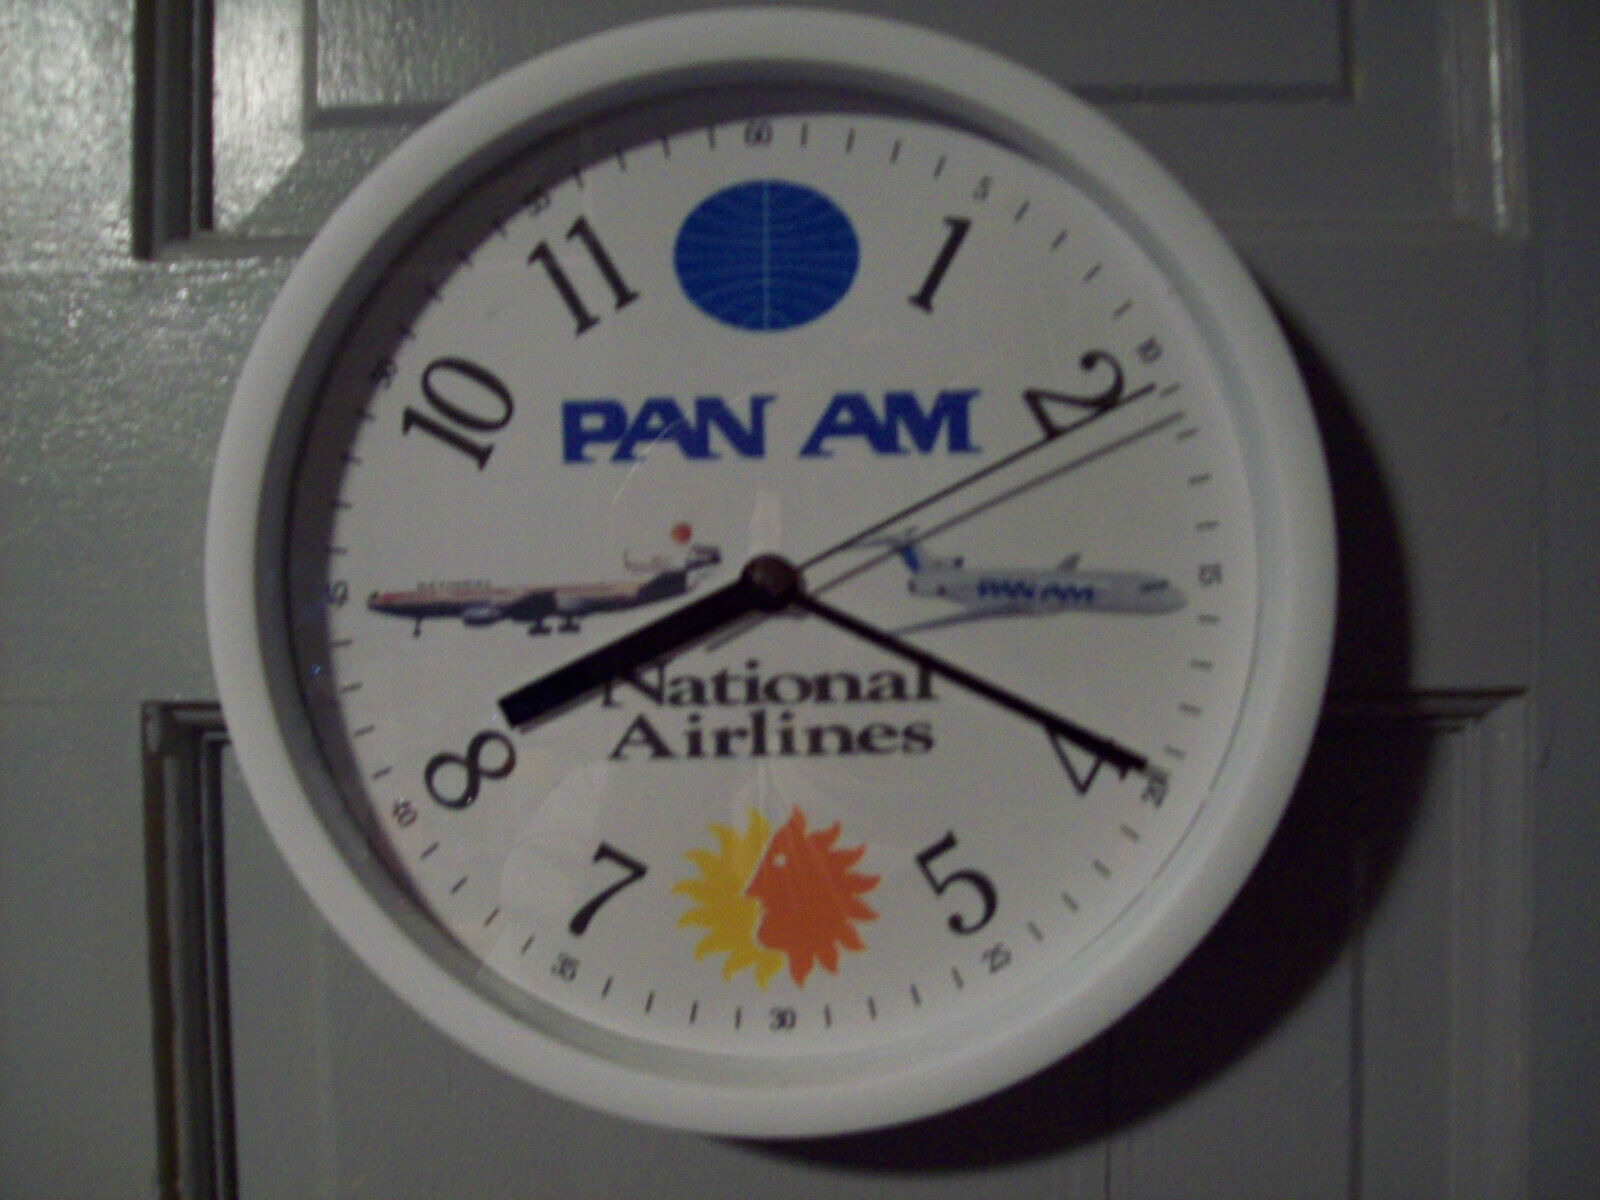 PAN AM BOEING 727  NATIONAL AIRLINES DC-10 WALL CLOCK